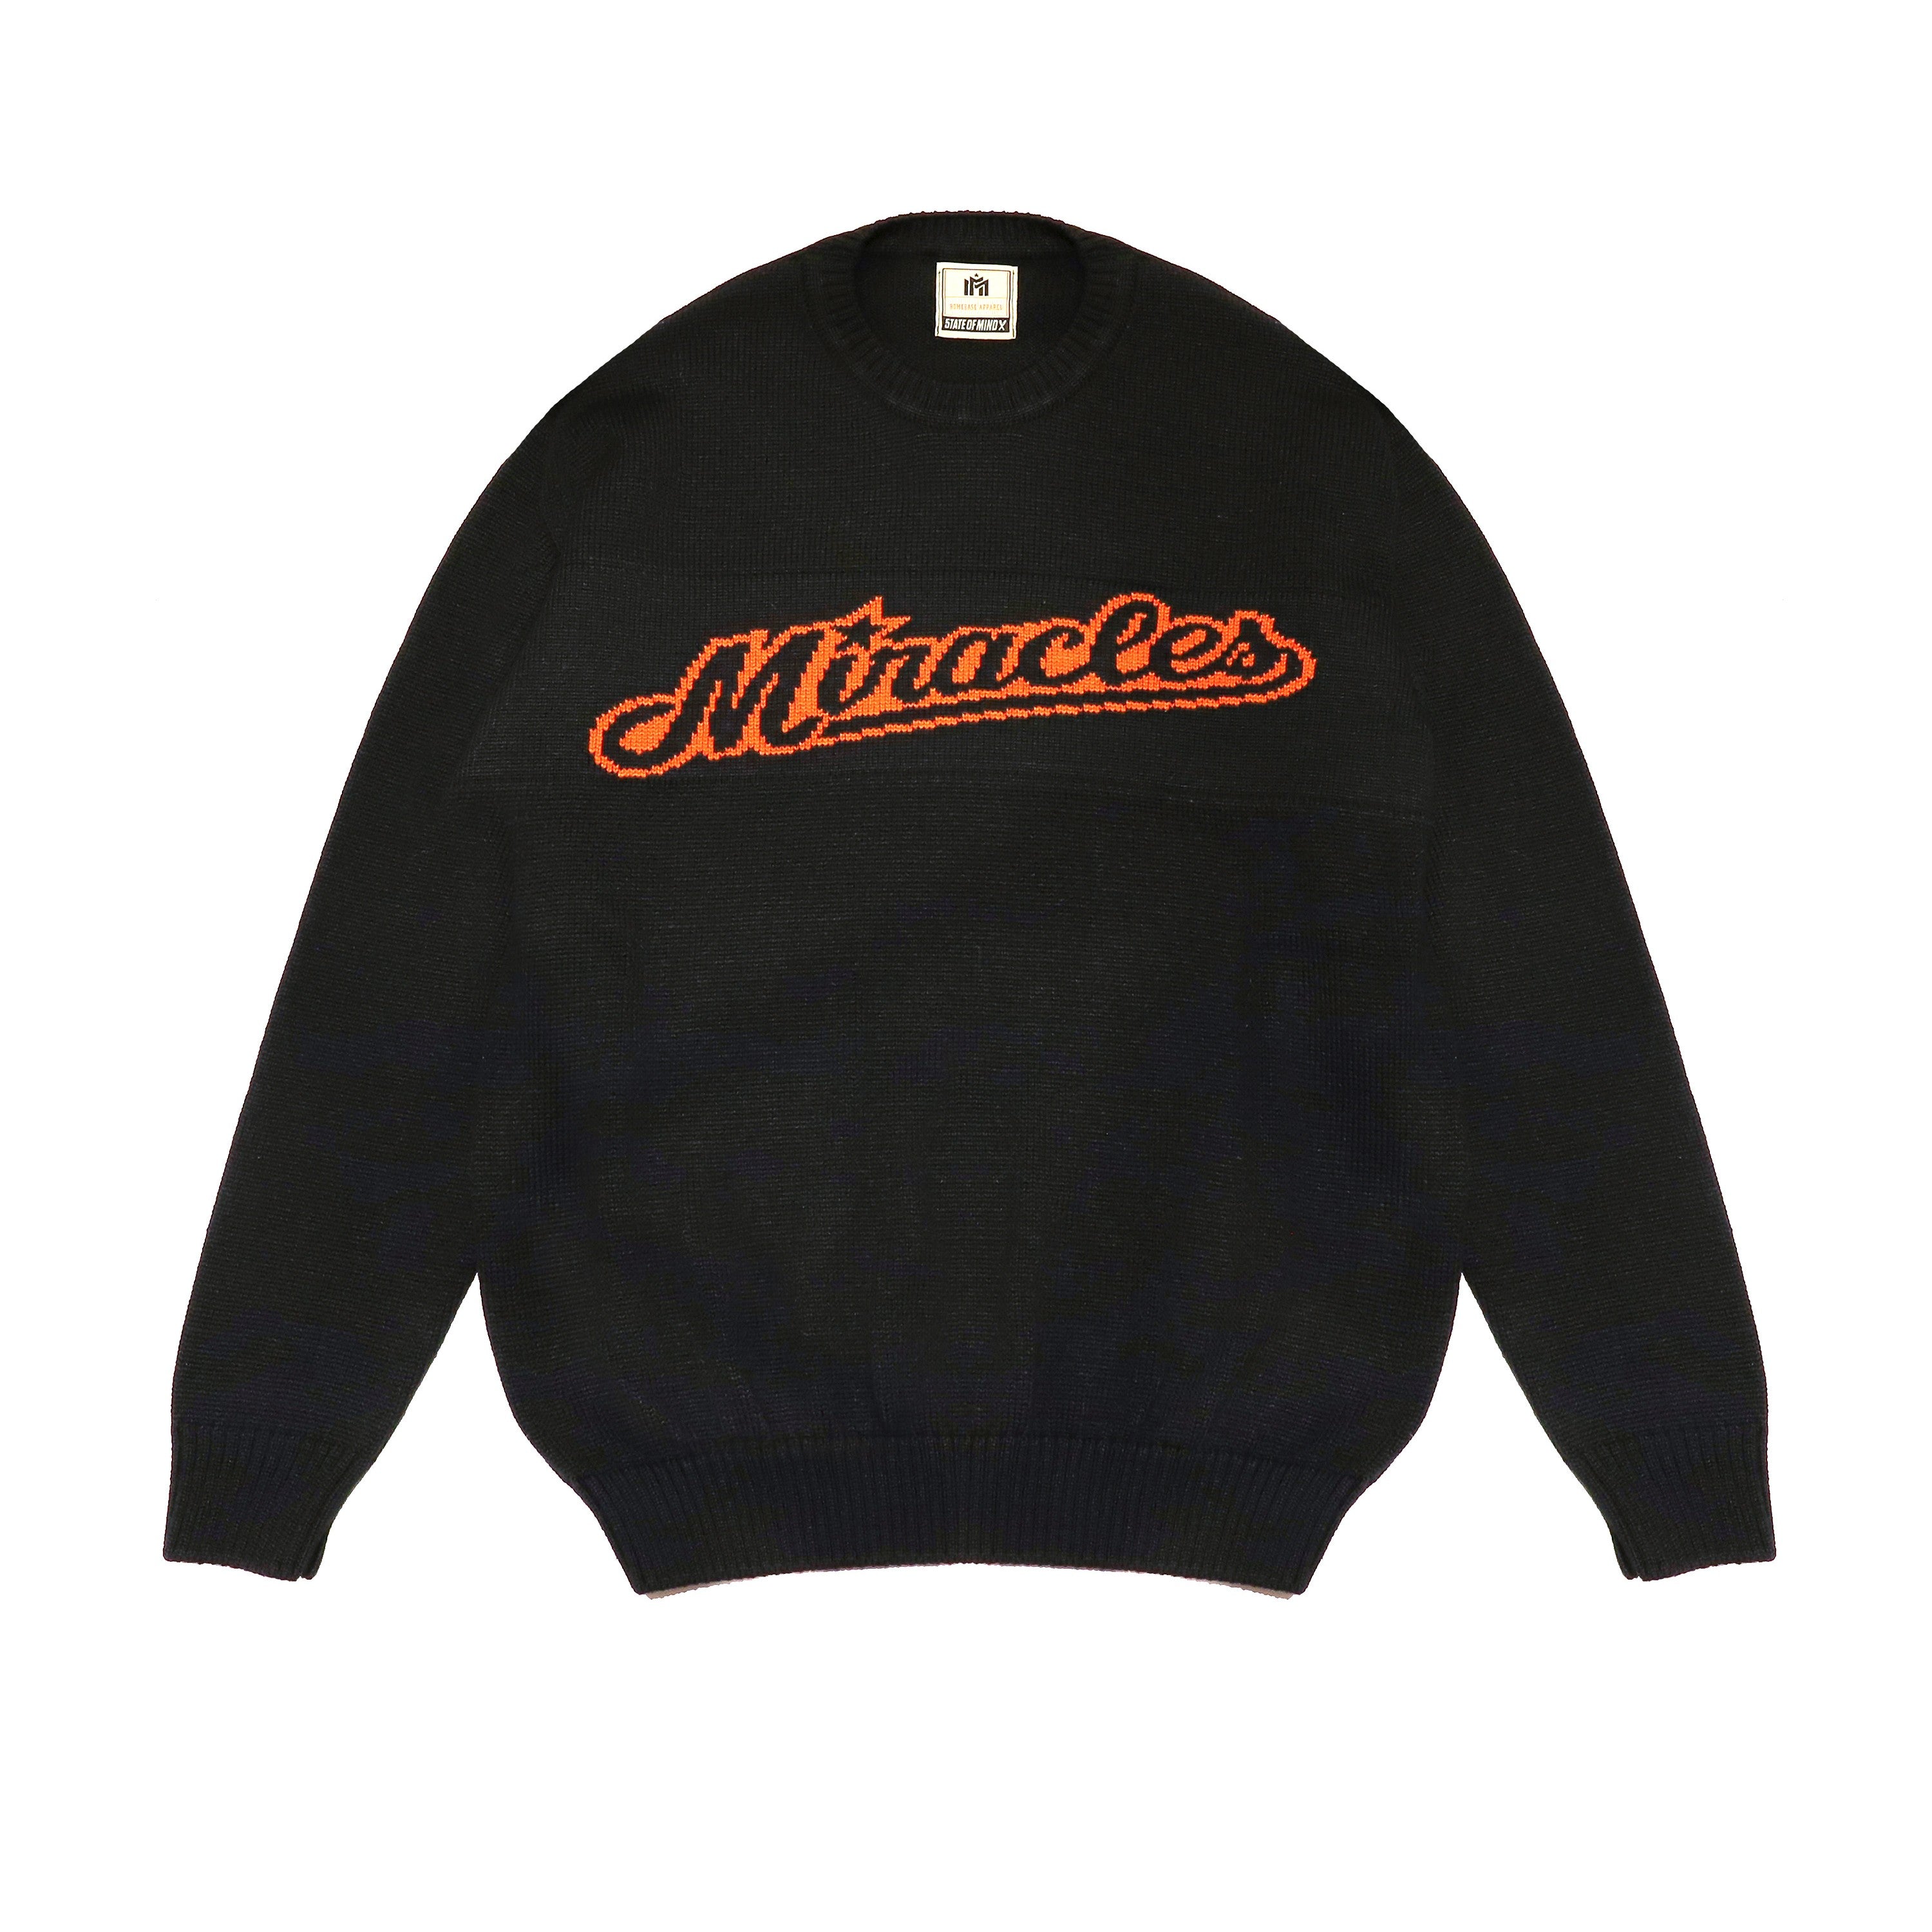 Emme-i Miracles Sweater X Gue' Black Men's Sweater